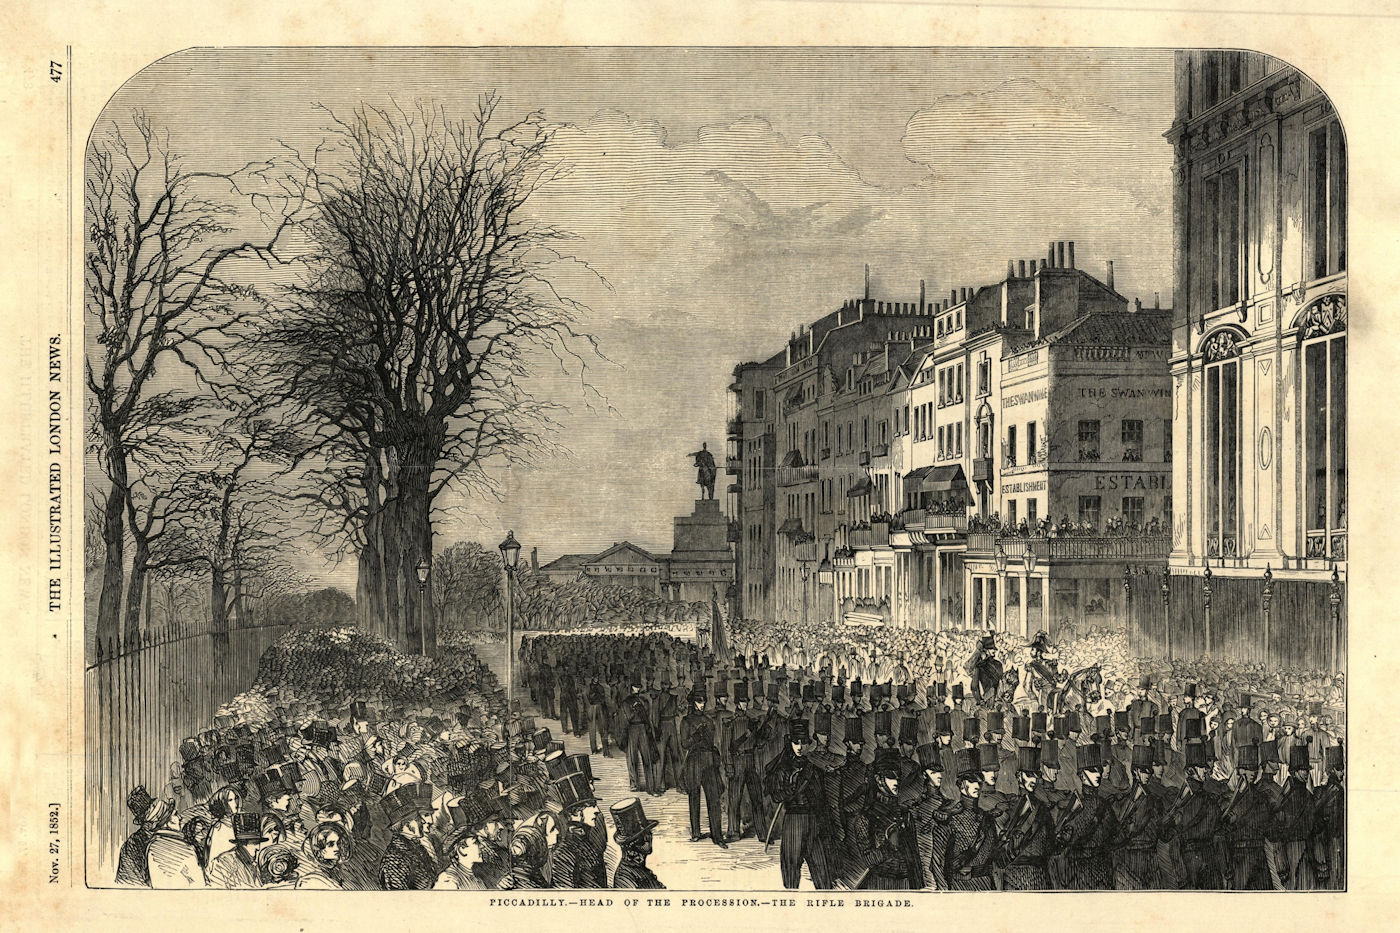 Piccadilly - head of the procession - the Rifle Brigade. London 1852 ILN print